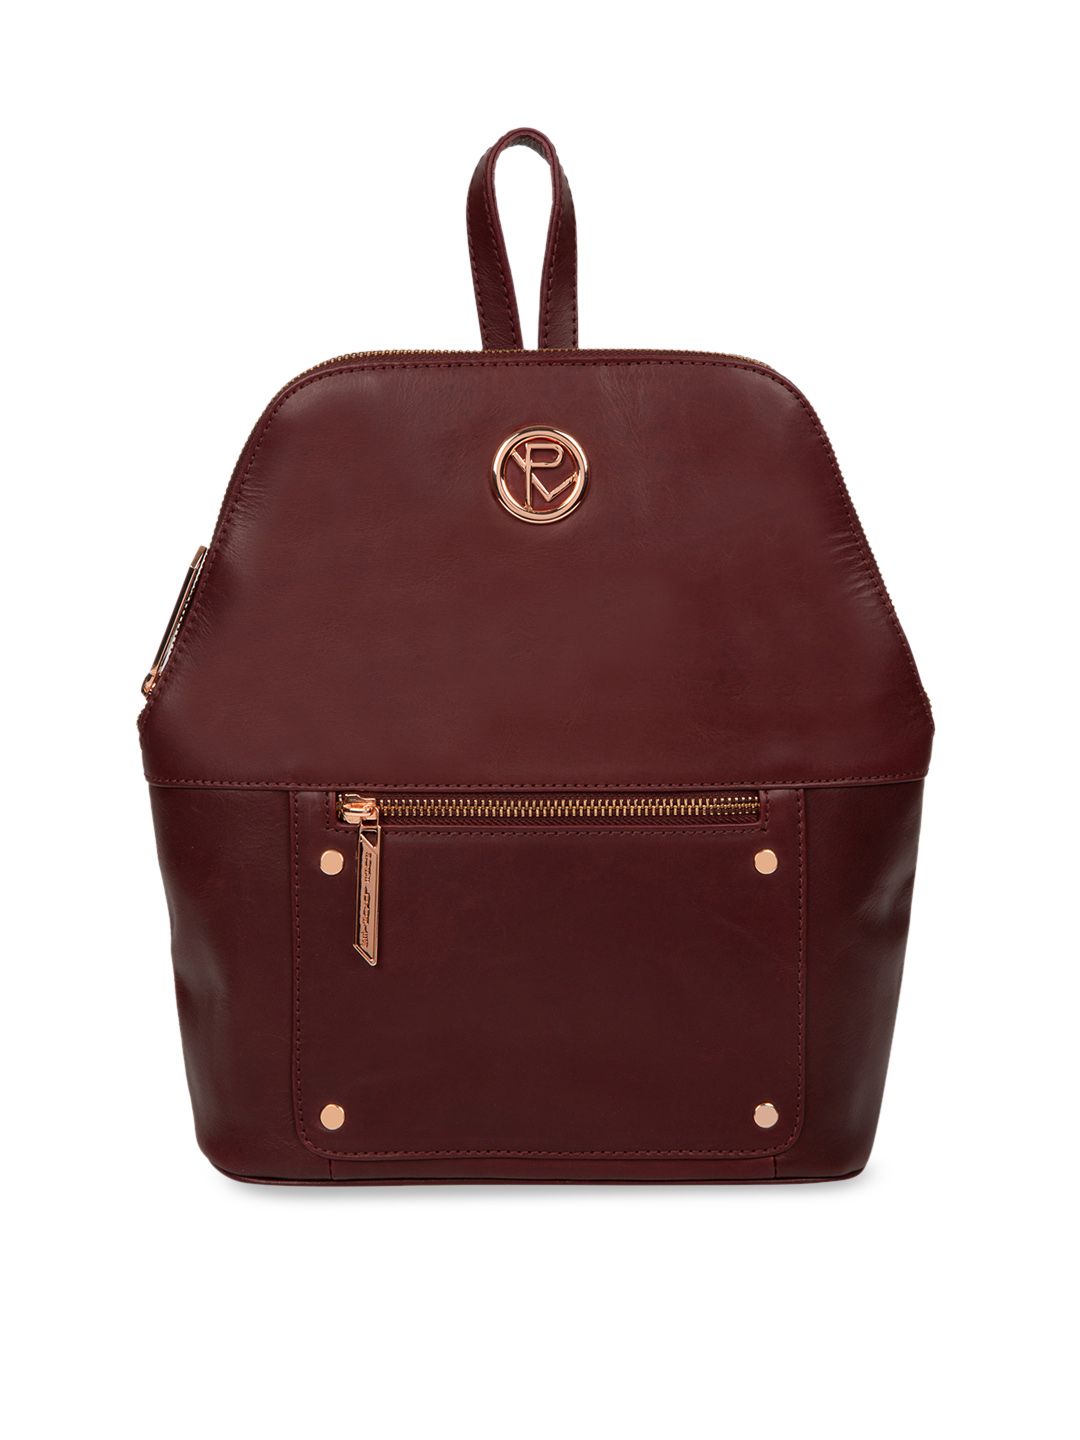 PURE LUXURIES LONDON Women Burgundy Rubens Handcrafted Genuine Leather Solid Backpack Price in India